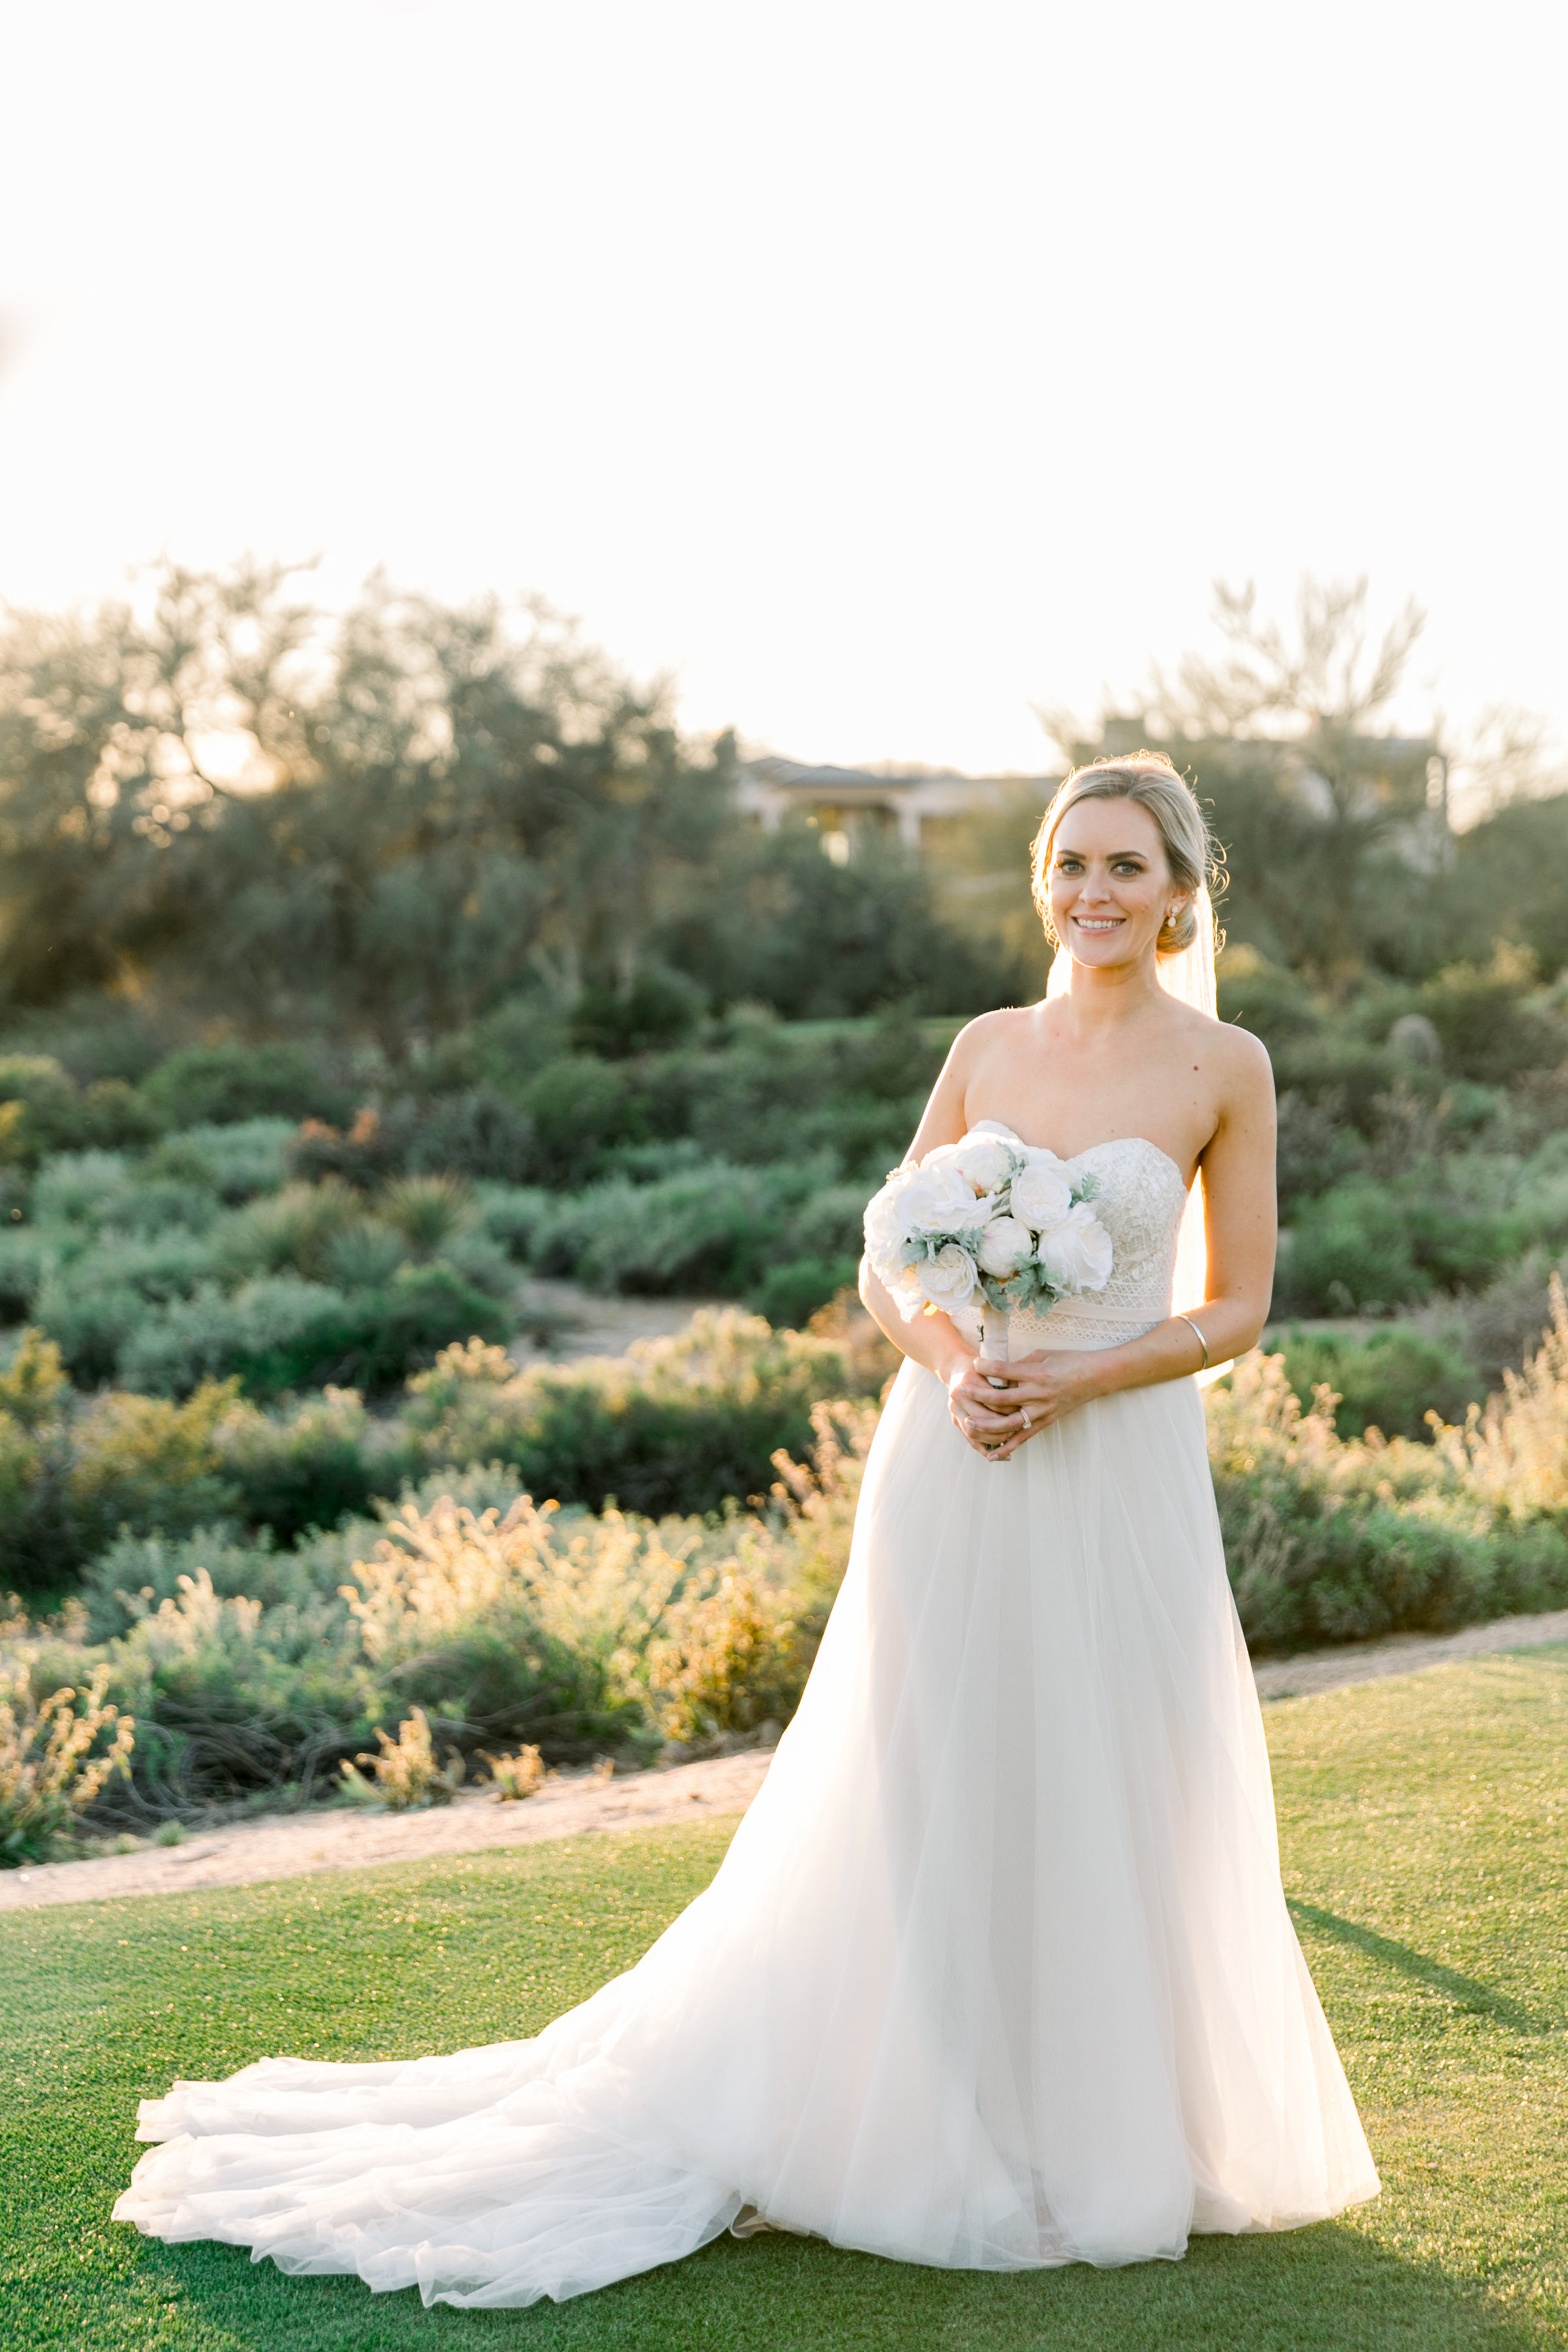 Karlie Colleen Photography - Arizona Wedding at The Troon Scottsdale Country Club - Paige & Shane -662